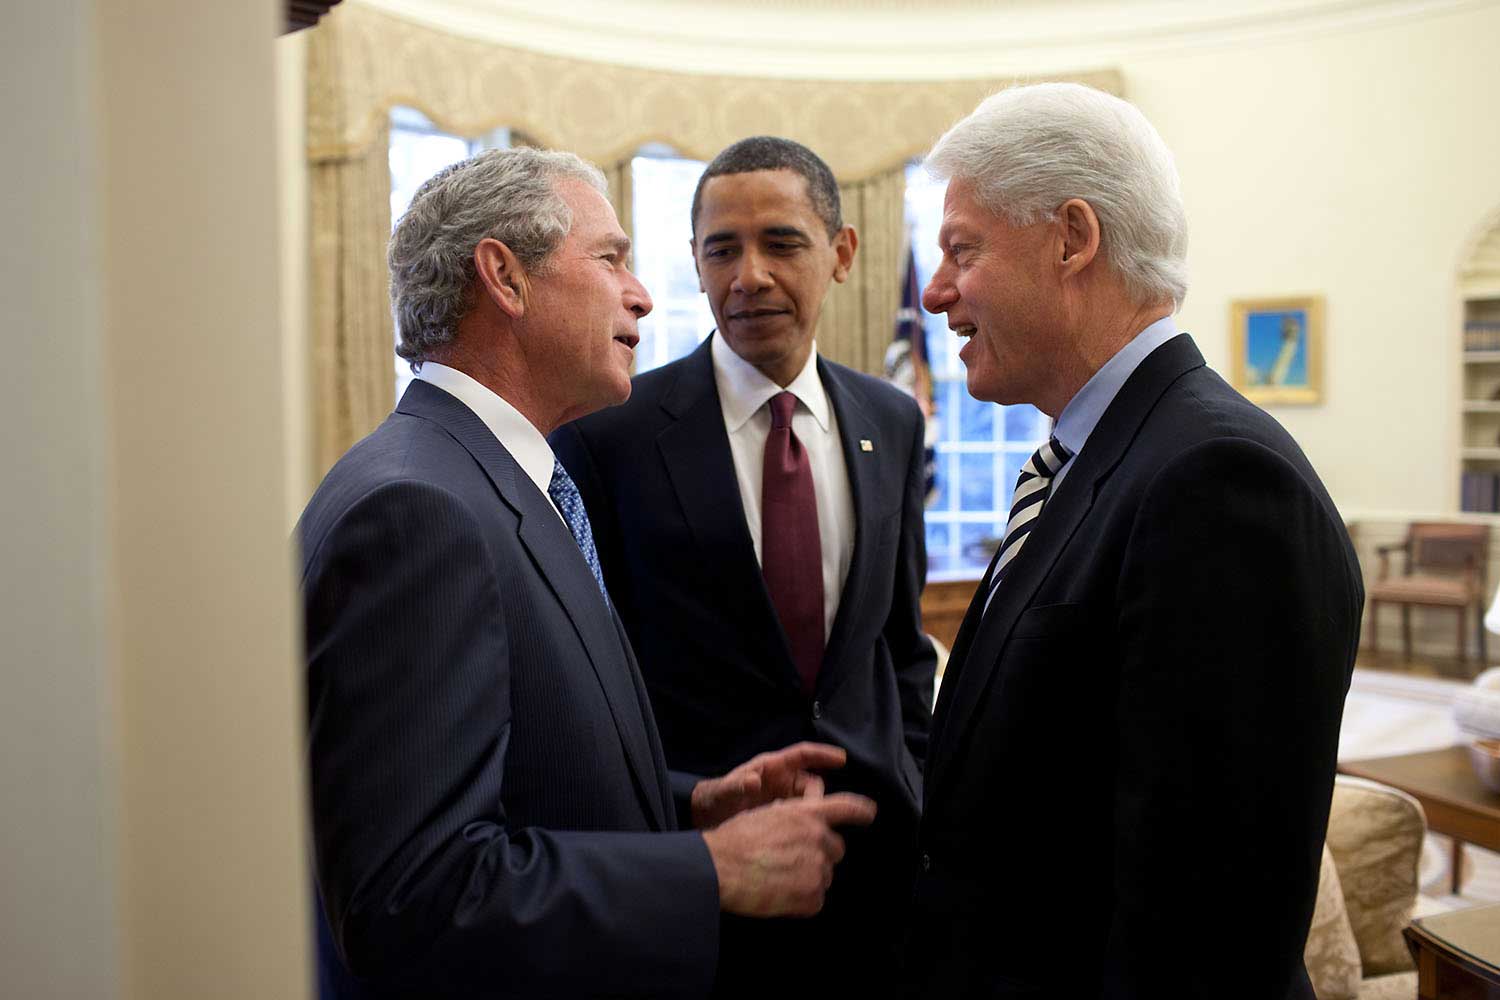 "President Obama had called on the two former Presidents to help with the situation in Haiti. During their public remarks in the Rose Garden, Jan. 16, 2010, President Clinton had said about President Bush, ÔIÕve already figured out how I can get him to do some things that he didnÕt sign on for.Õ Later, back in the Oval, President Bush is jokingly asking President Clinton what were those things he had in mind.Ó